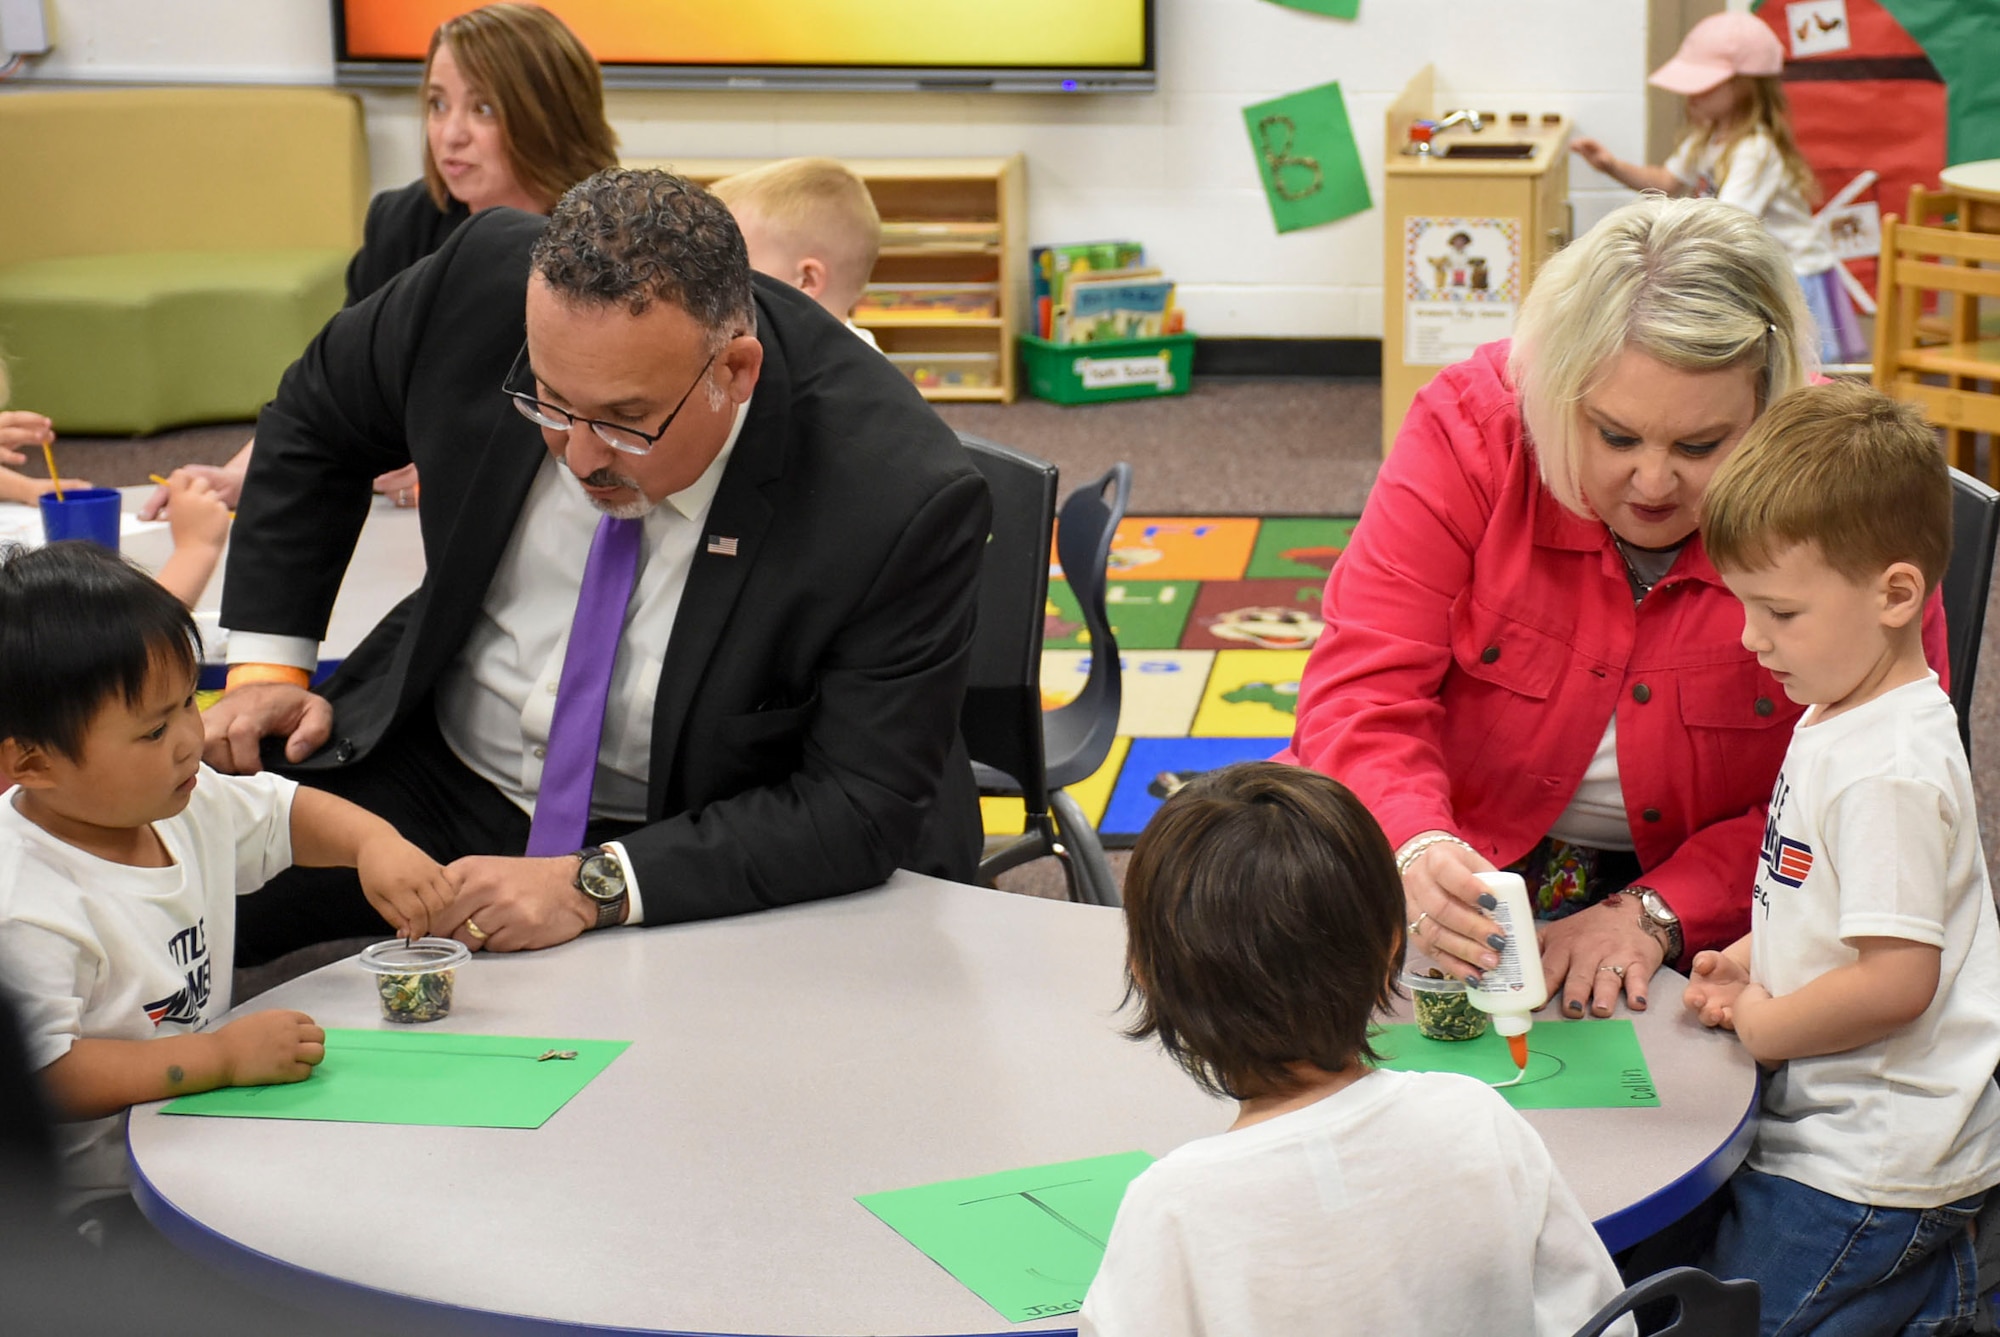 Dr. Miguel Cardona, wearing a purple tie to show support for military children, sits at a table with a woman in a red jacket and three preschoolers wearing white "Little Wingmen" t-shirts.